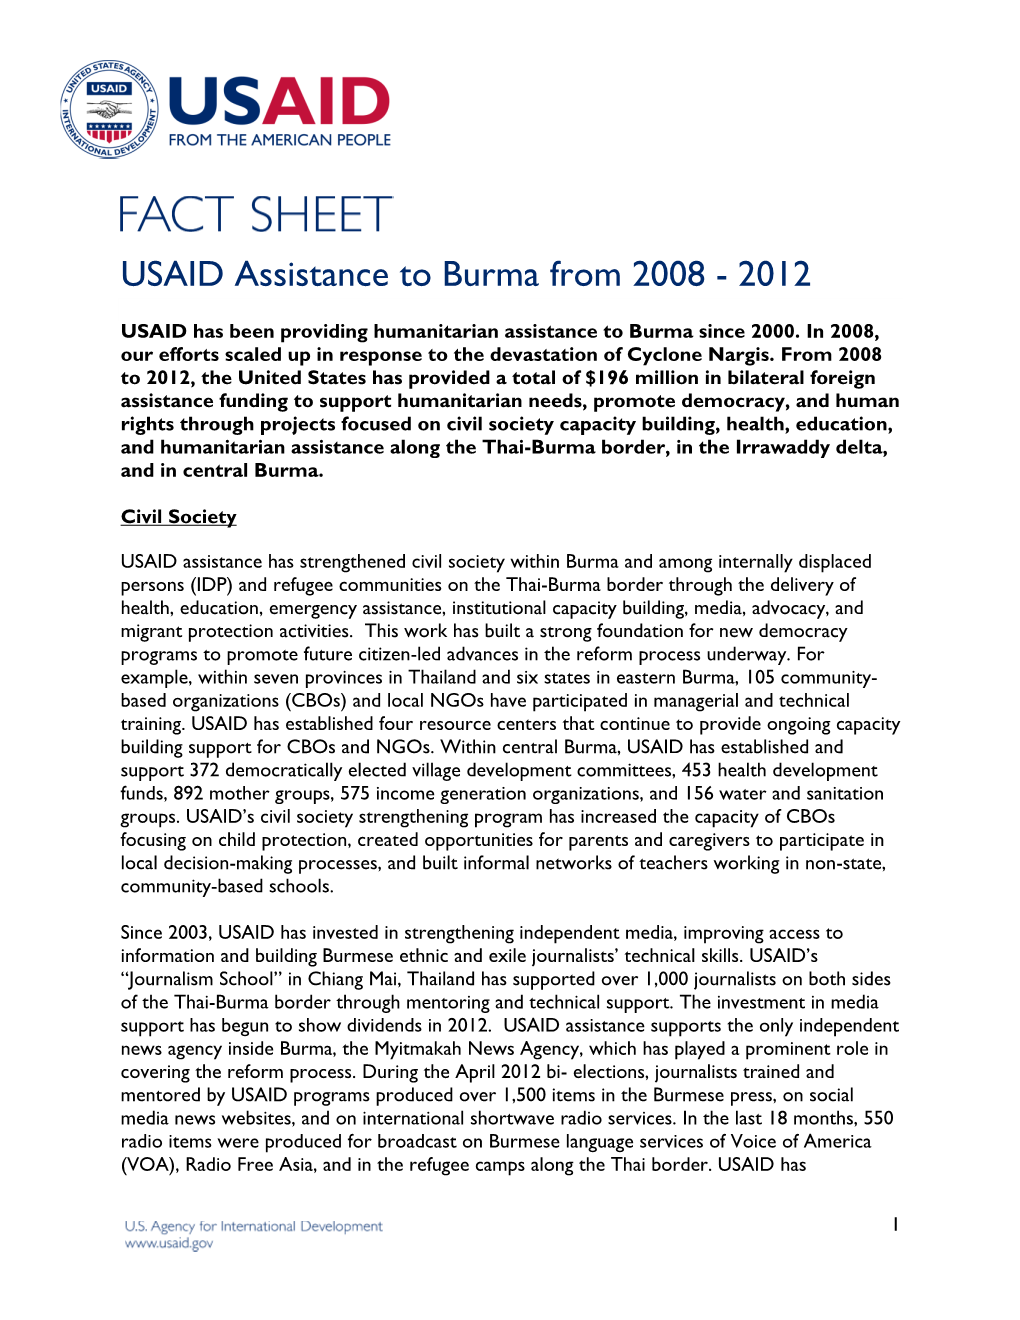 Fact Sheet: USAID Assistance to Burma from 2008